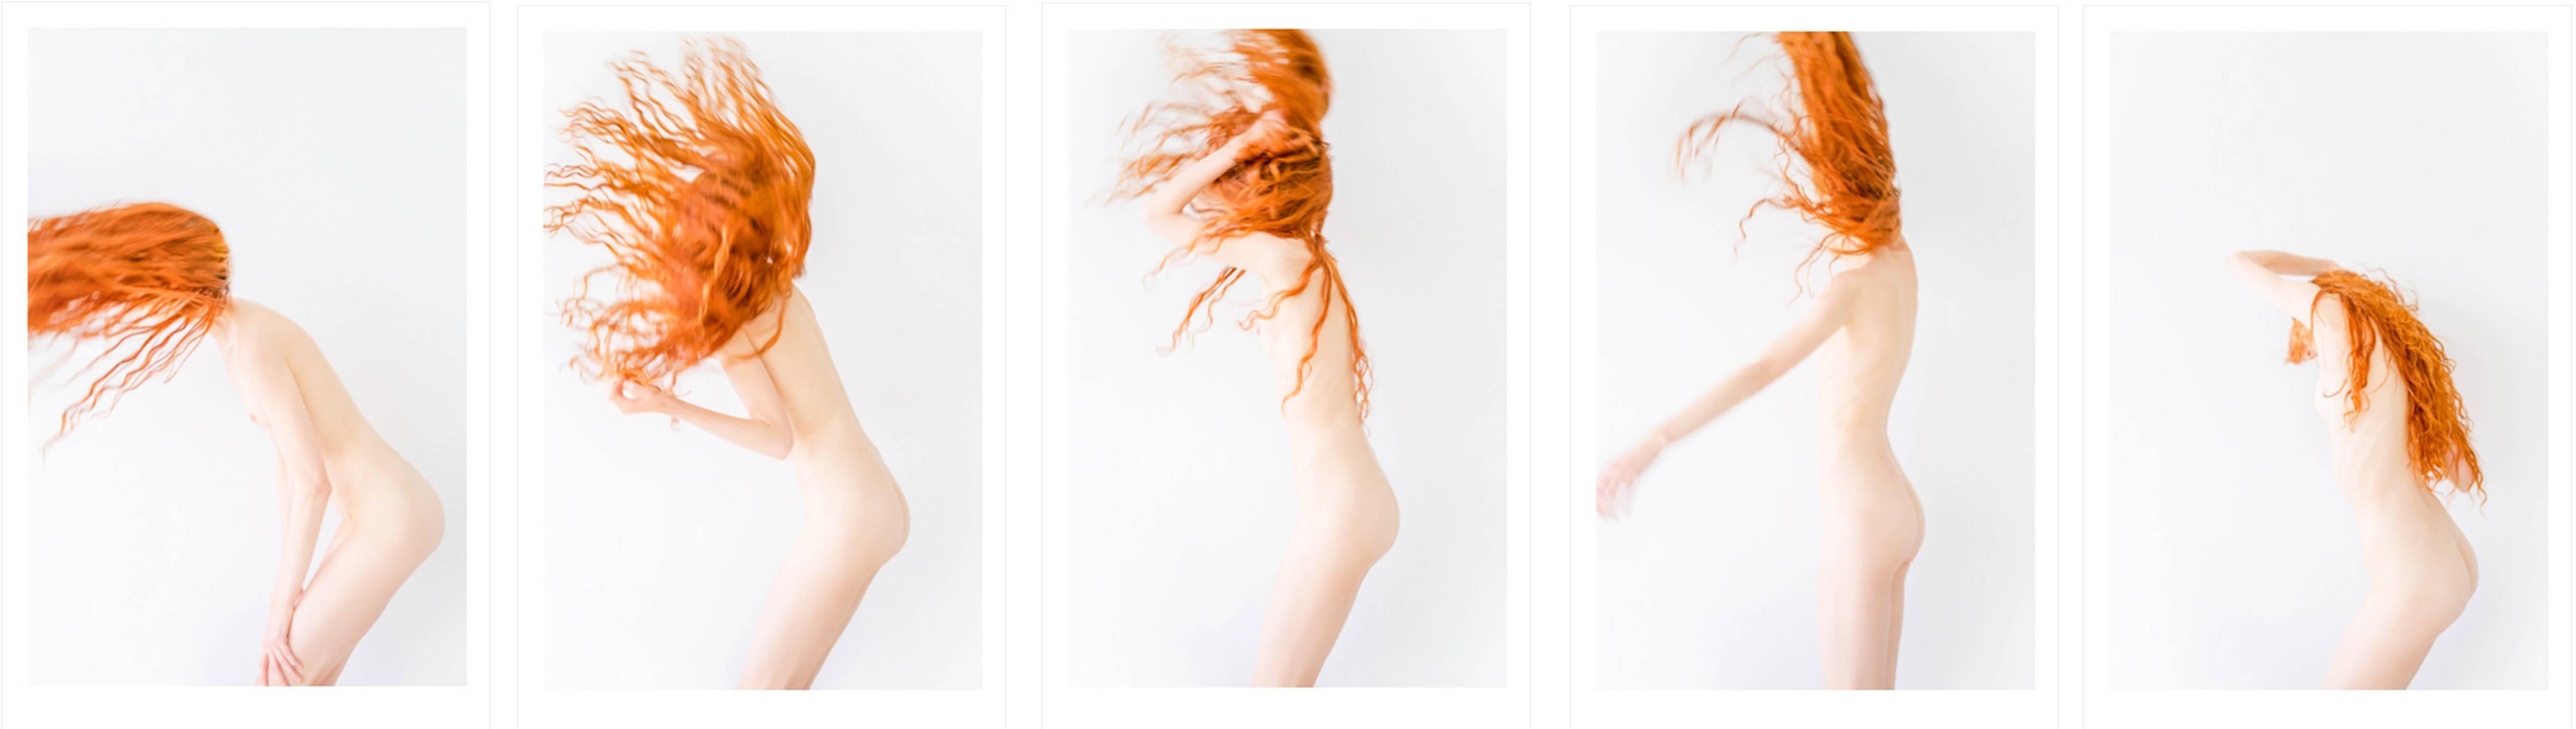 David Jay Color Photograph - RED!. Polyptych  #1-7-6-4-12 . Nude photography in color.